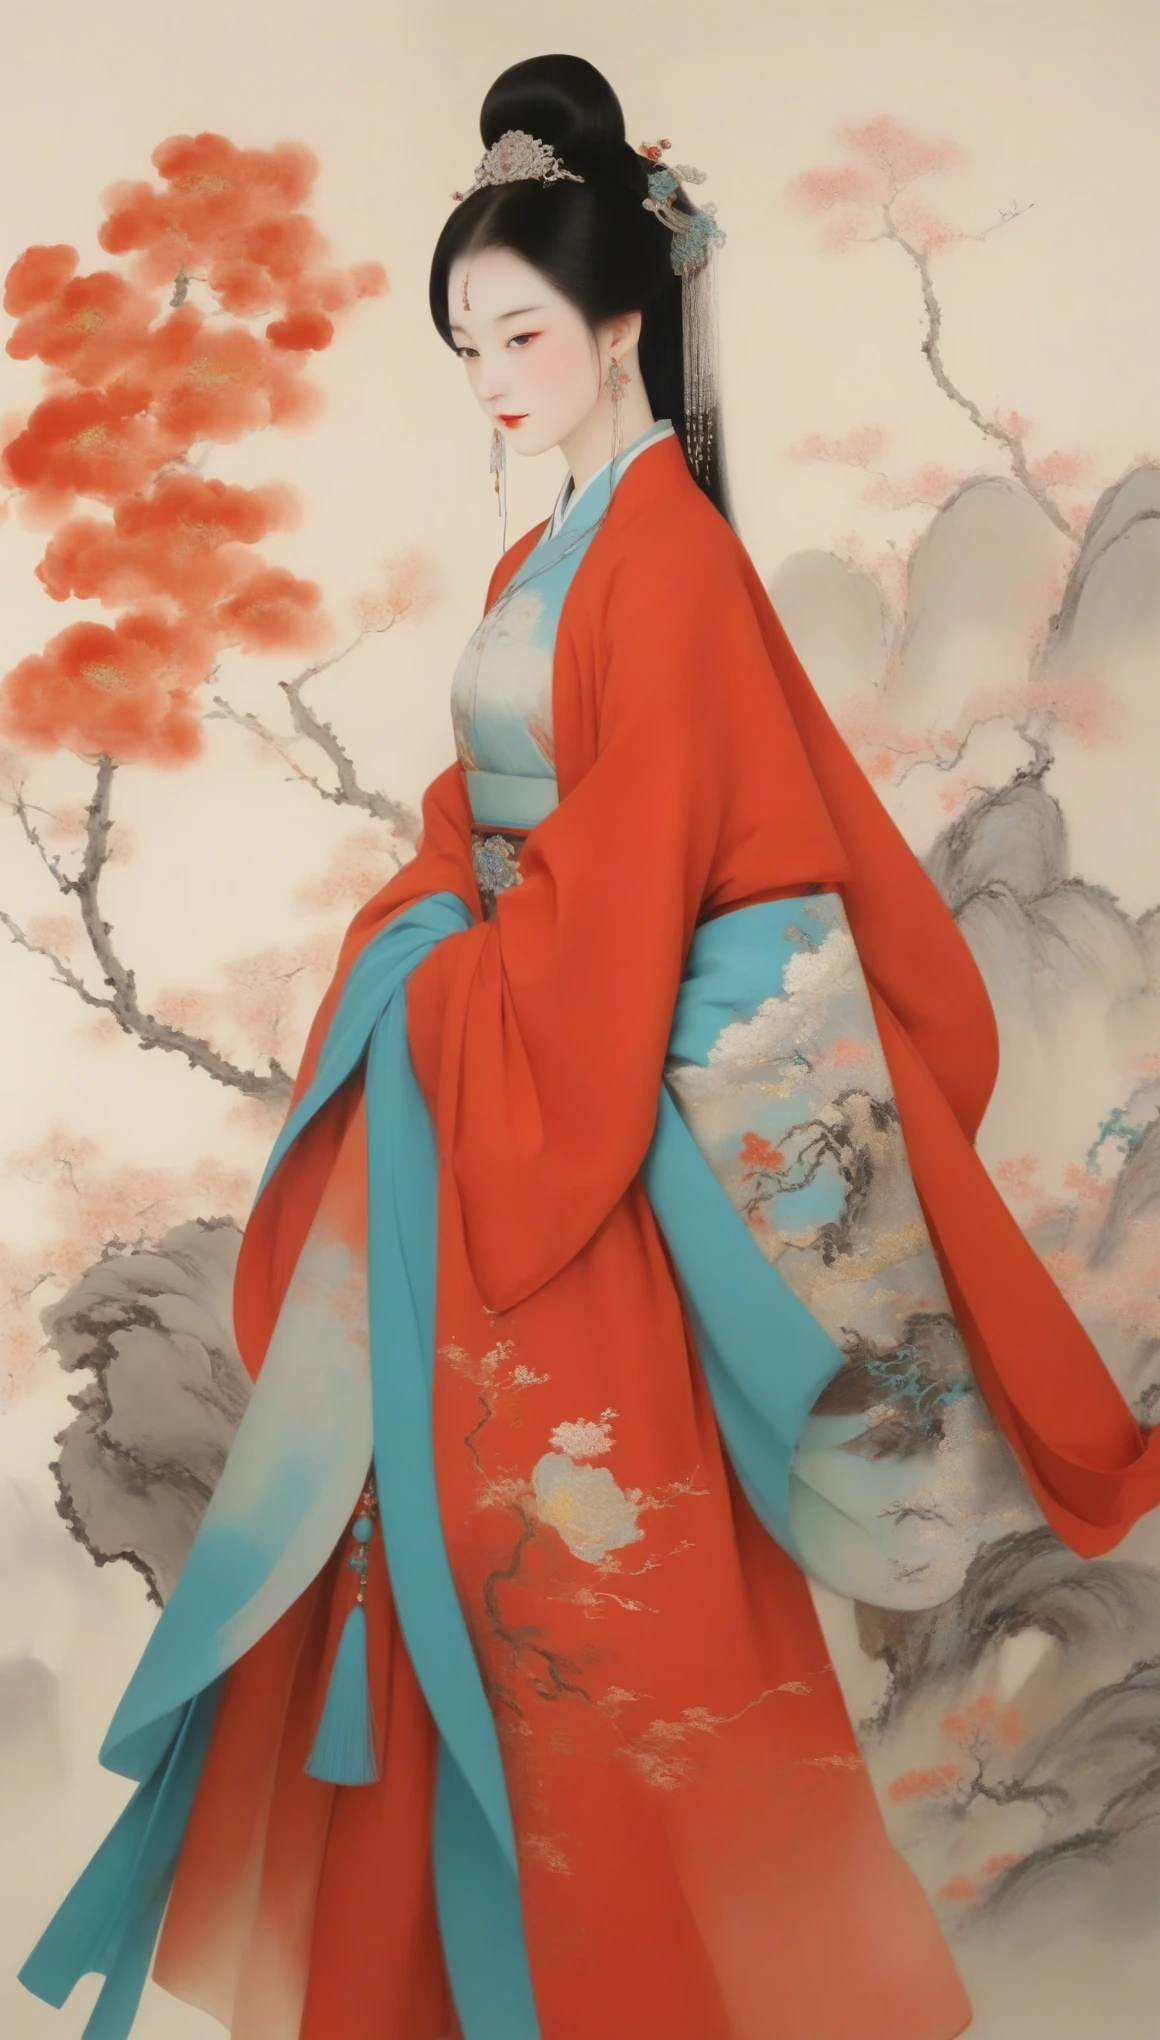 Wu Guanzhong&#39;s works，（The beautiful Queen Zhaojun of the Western Han Dynasty of China went out to the fortress：0.13），（whole body），（Han Dynasty red hooded cloak costume），Appearance plump and rounded，Round face shape，The eyes are not big，Small nose，Lips are red and slightly upturned，Has long black hair，background：Wu Guanzhong conquered both China and the West outside the Great Snow，His oil paintings are fresh、Bright，Full of national characteristics and lyrical meaning。Later he engaged in innovating ink painting，His paintings are somewhere between figuration and abstraction，Points to note、The rhythm of blending lines and ink blocks，With strong artistic personality and modern flavor。